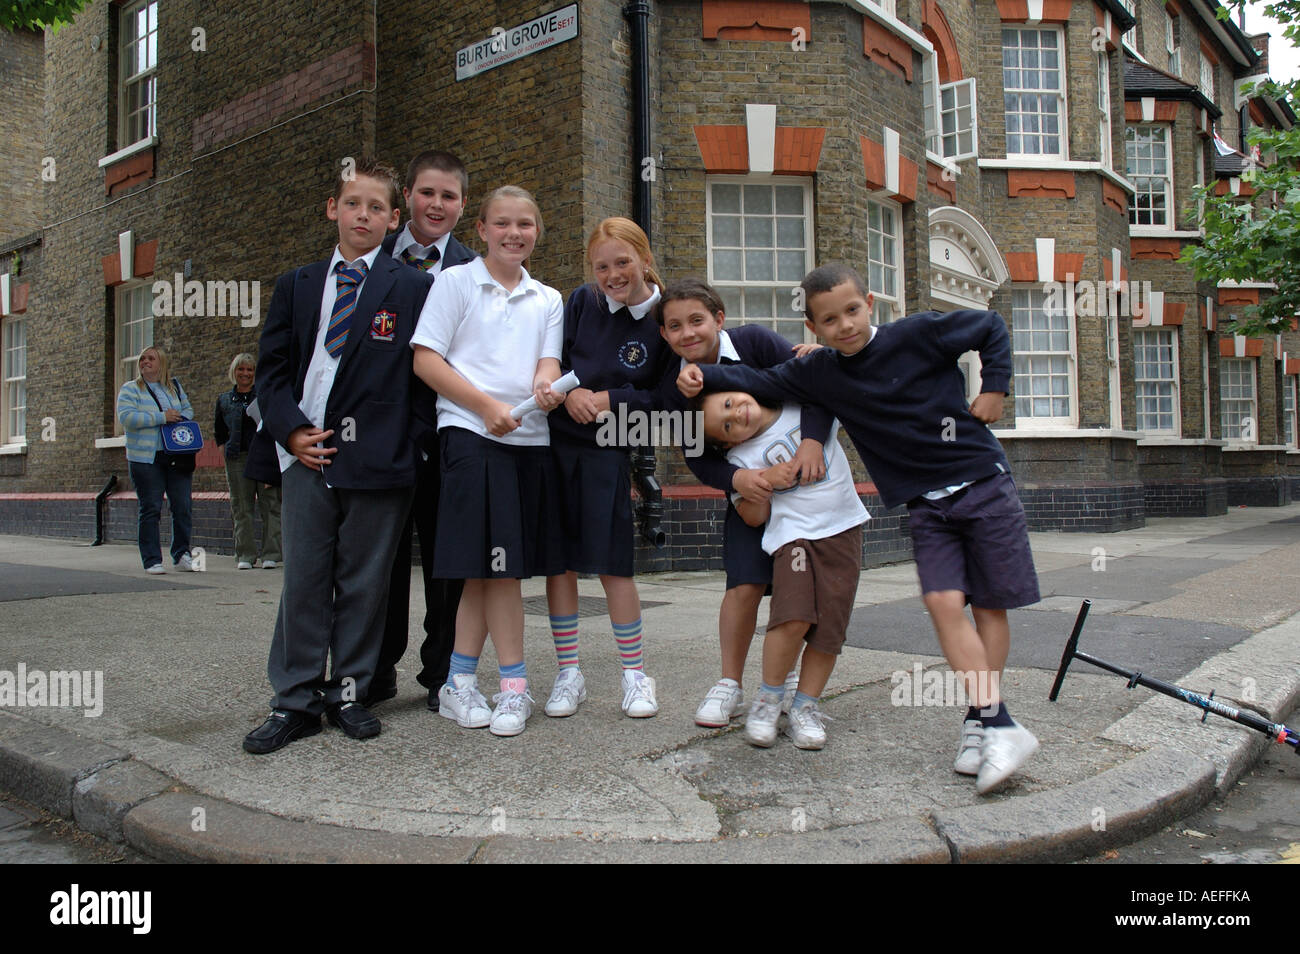 Mixed age group of children posing in the street on way home from school Stock Photo